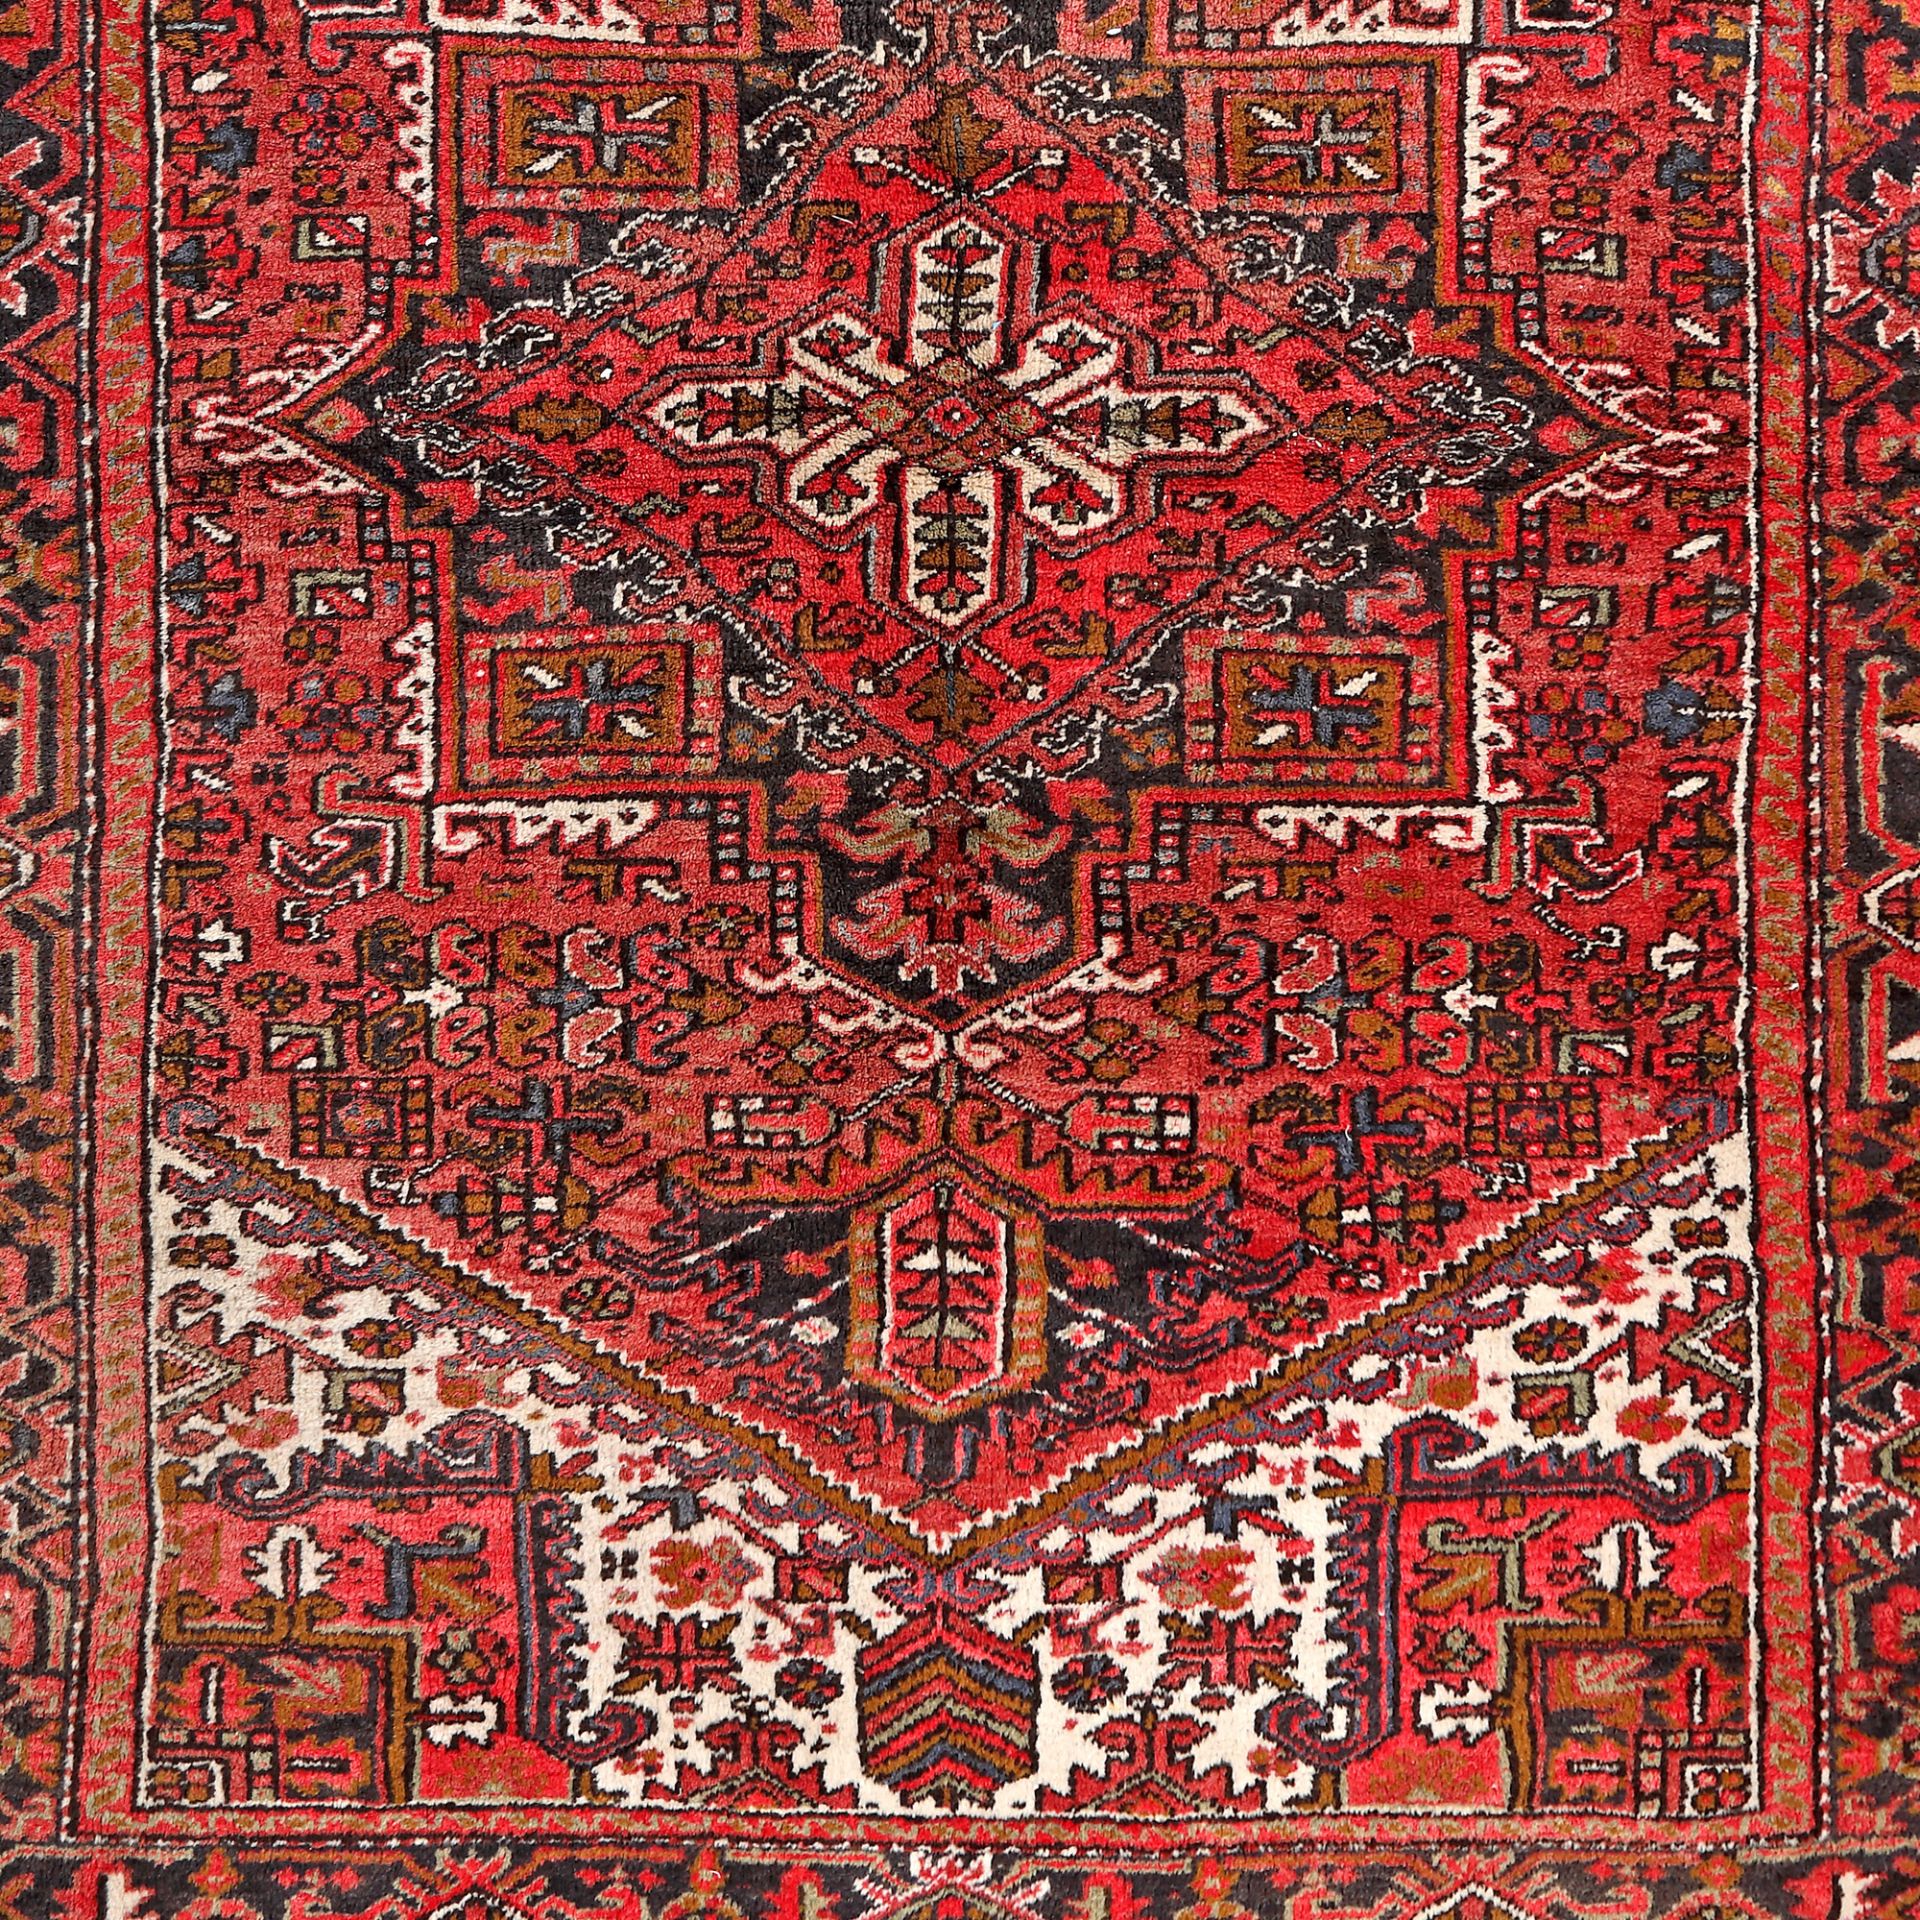 Heriz wool rug, decorated with medallion and acanthus leaves, Iran, mid-20th century - Image 2 of 2